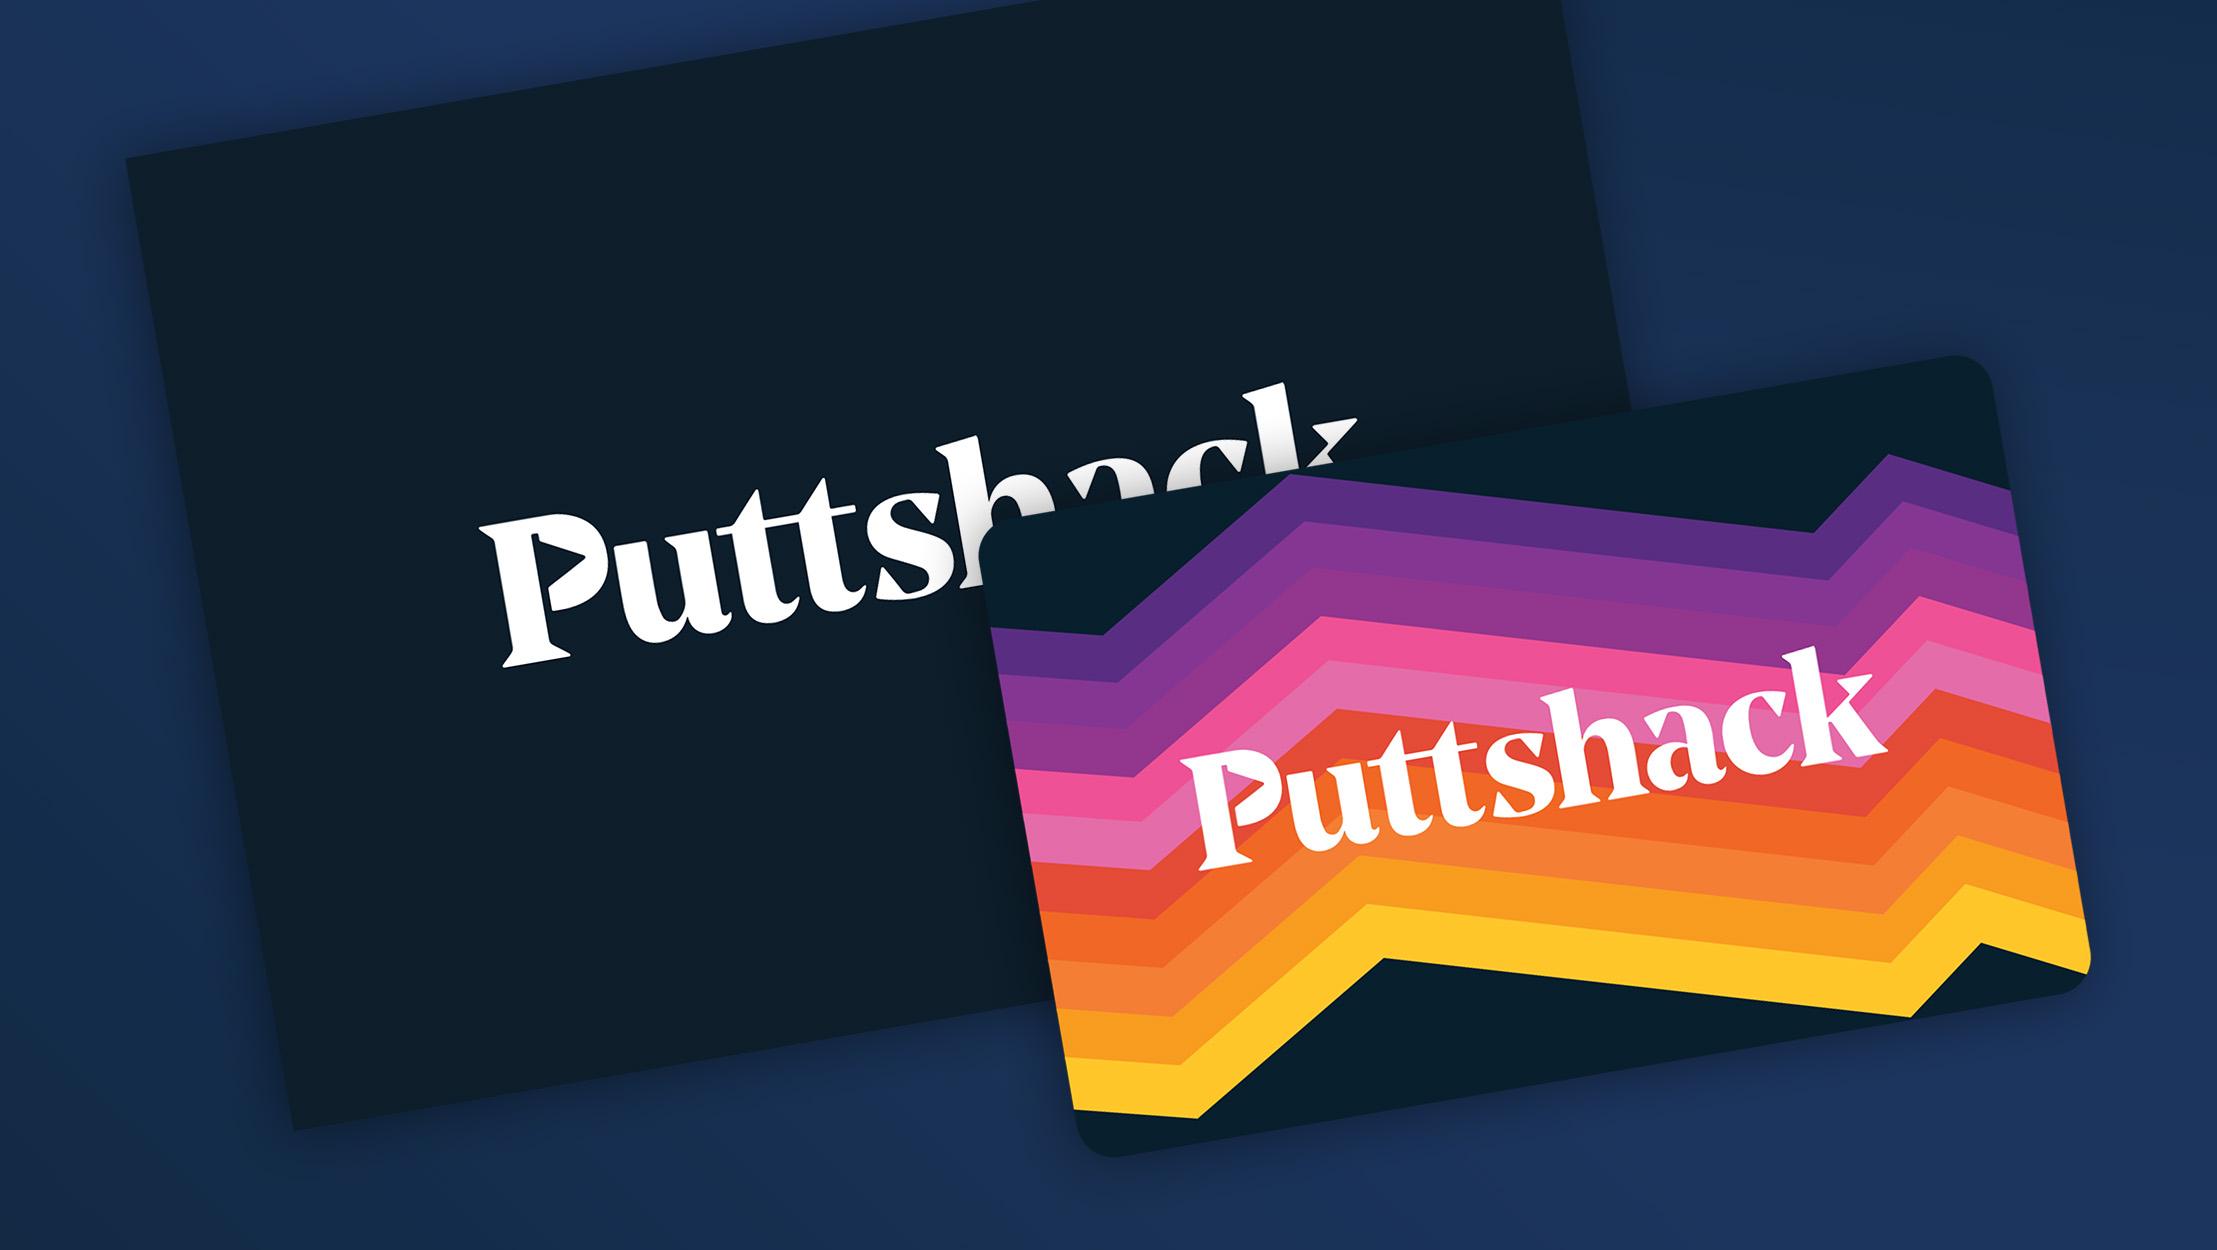 Puttshack gift card with holder